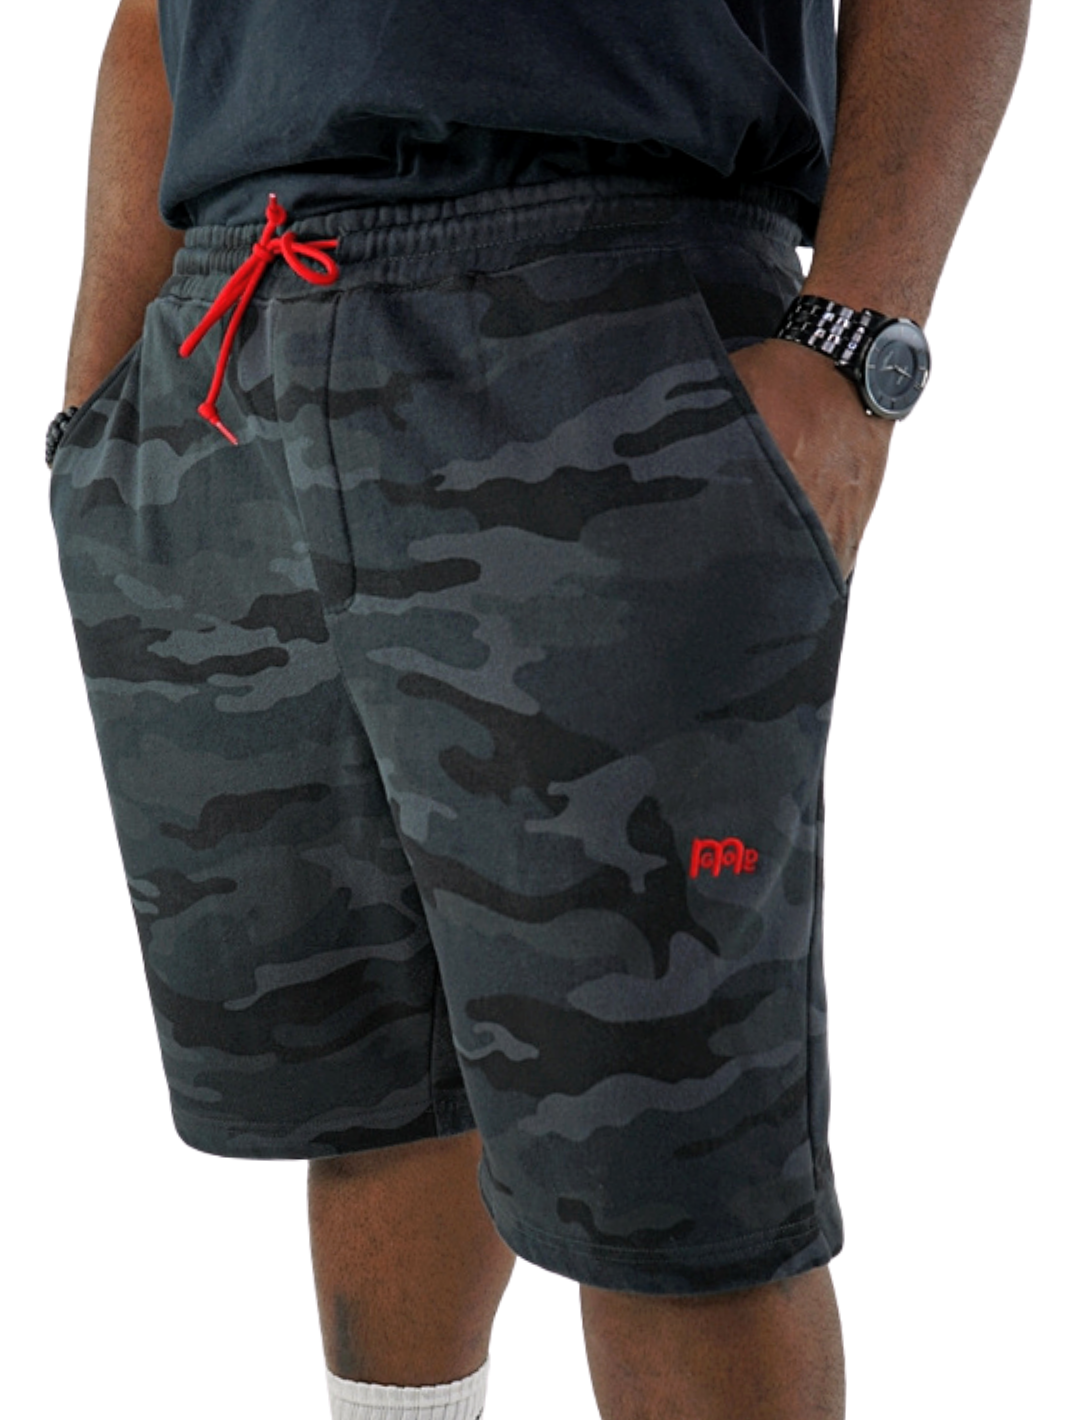 These actively casual GODinme shorts from our Romans 12 : 21 Collection come in a Black or Green Camouflage design. Complete with a bold embroidered logo and a shoestring draw cord in Red, to make a faithful statement wherever you go.